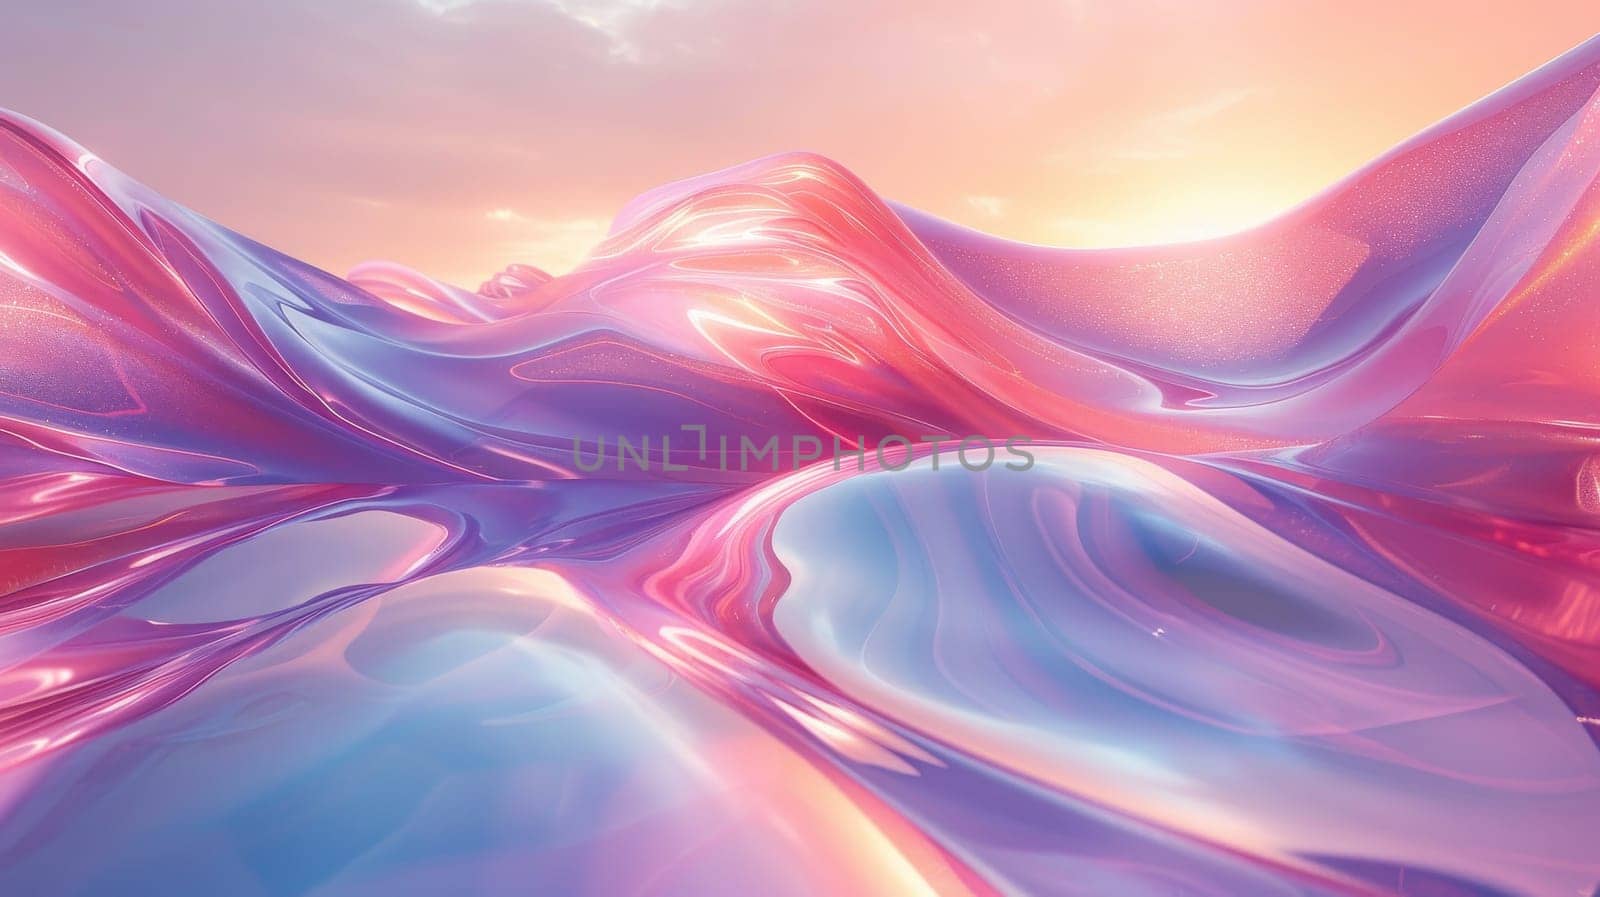 A colorful, abstract background with a blue and pink sky. The sky is filled with bright colors and the ground is a mix of blue and pink. Scene is vibrant and energetic